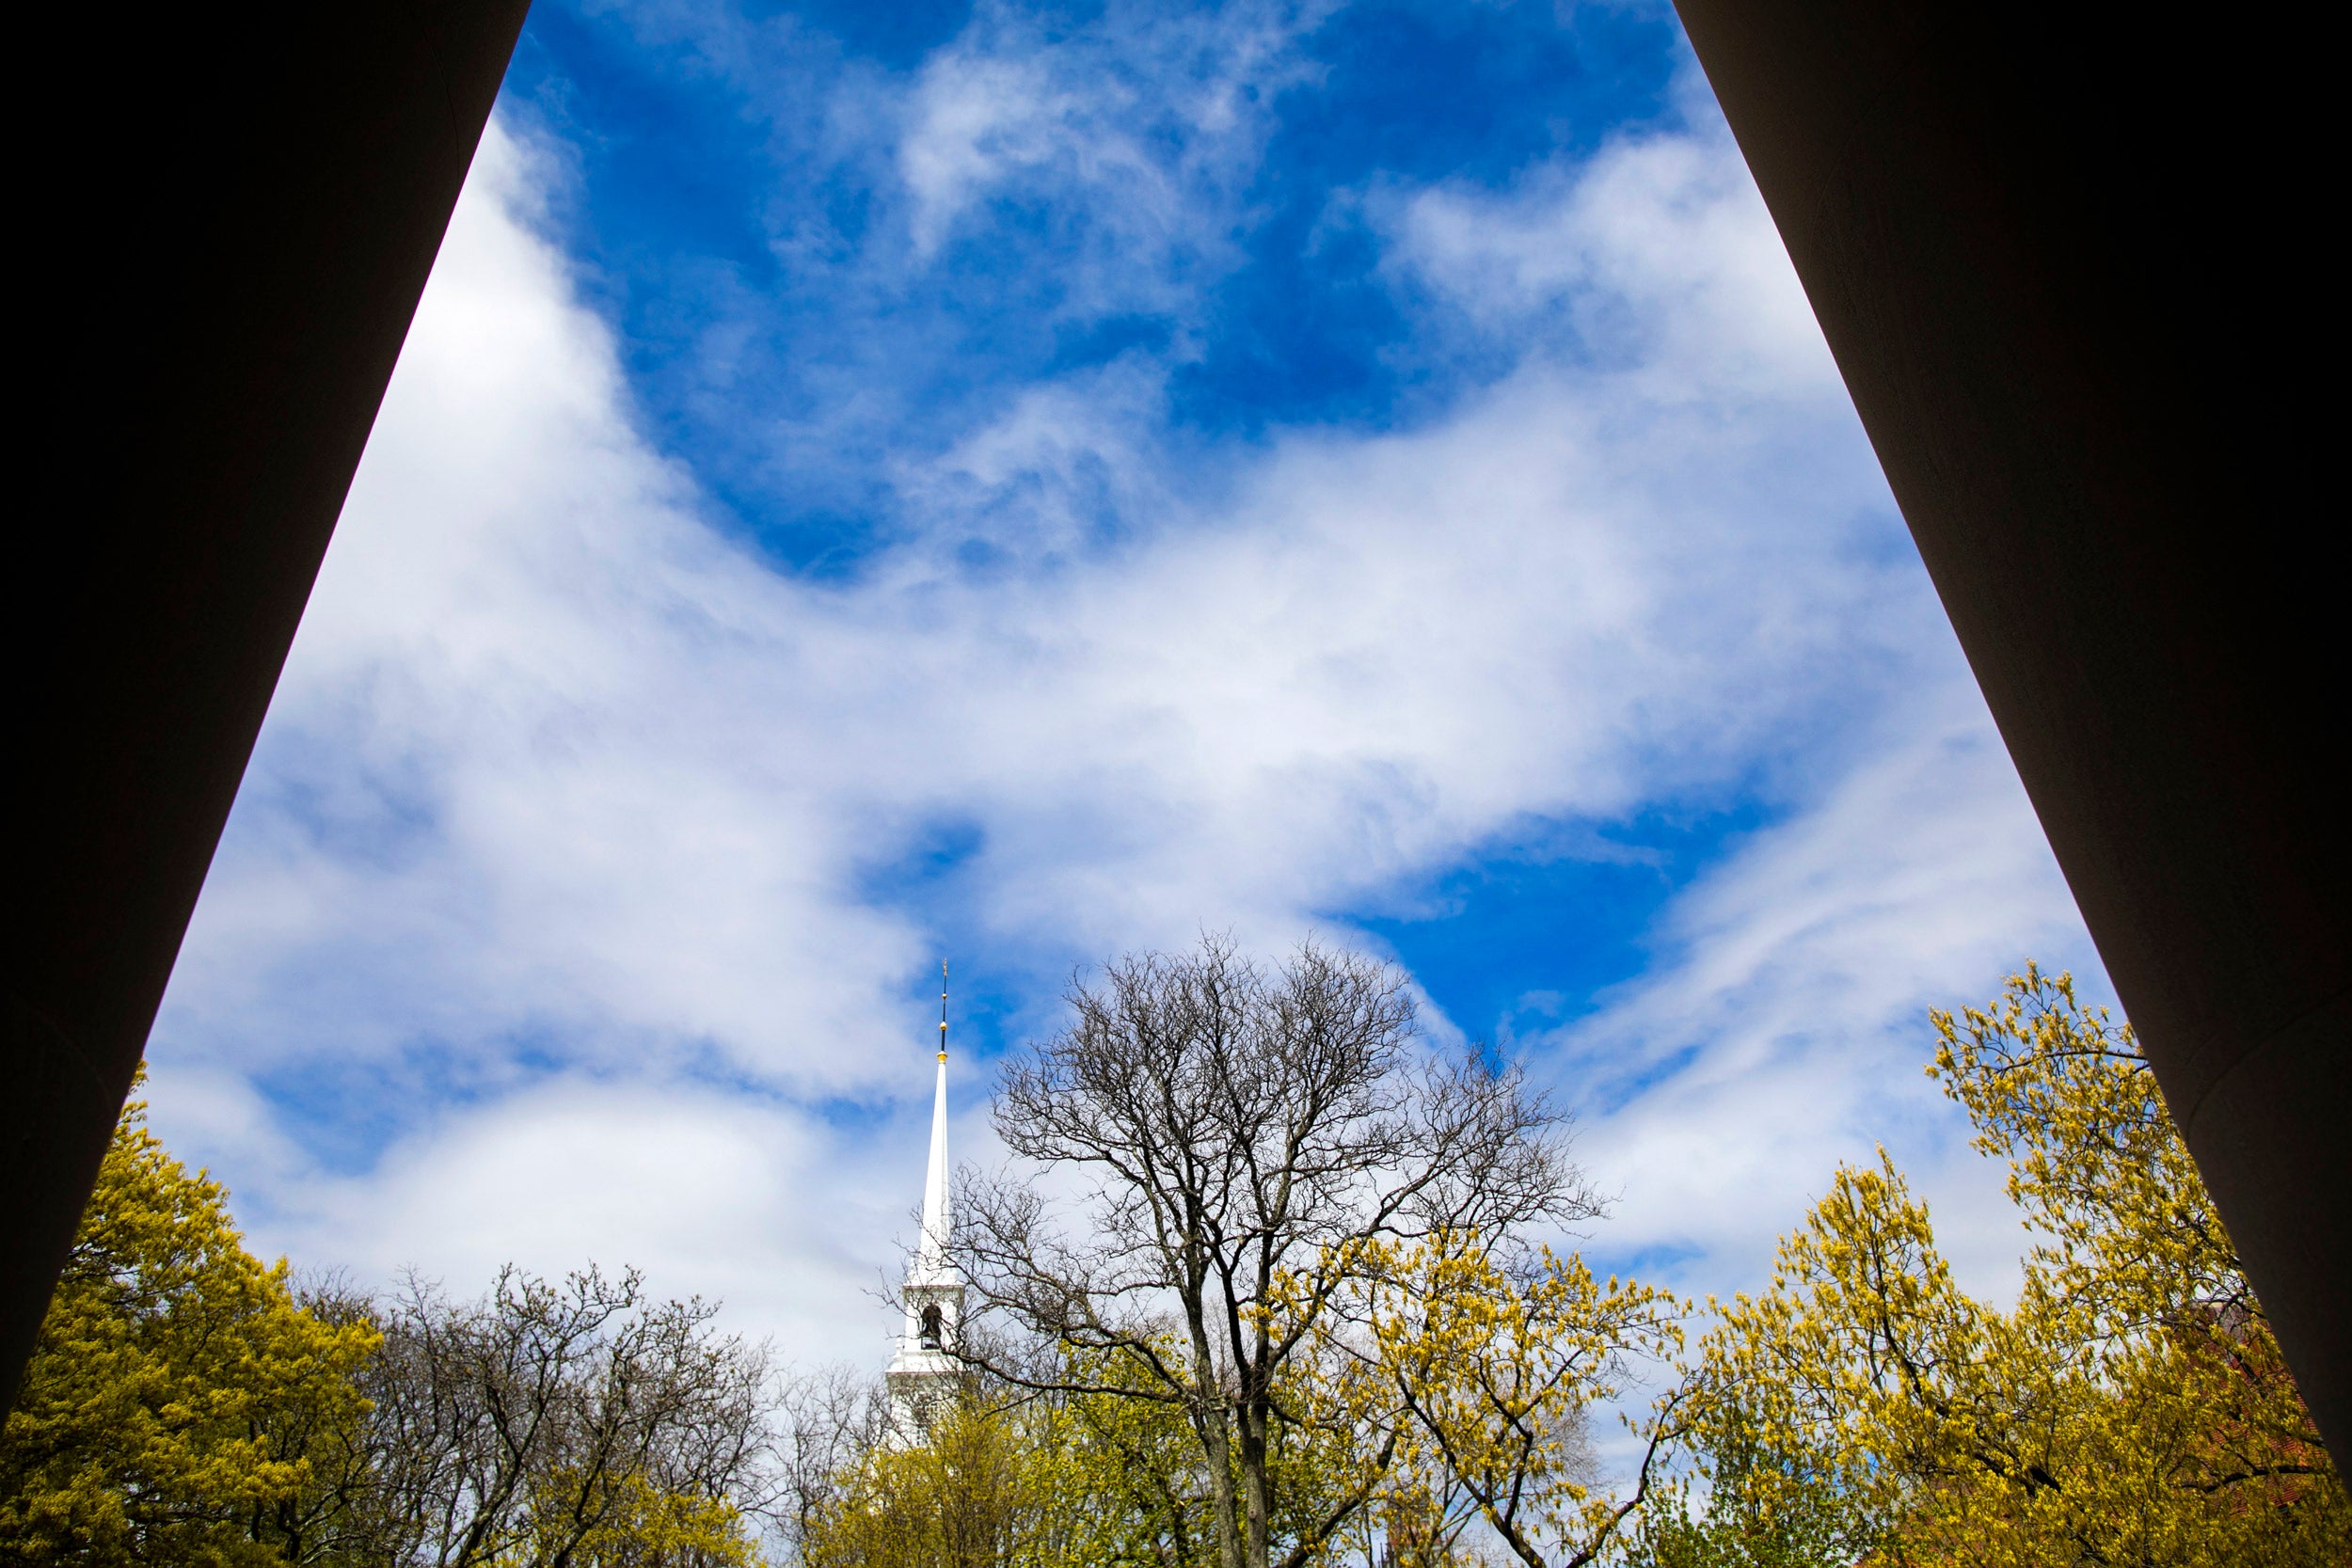 The columns of Widener Library frame the skies above Memorial Church.